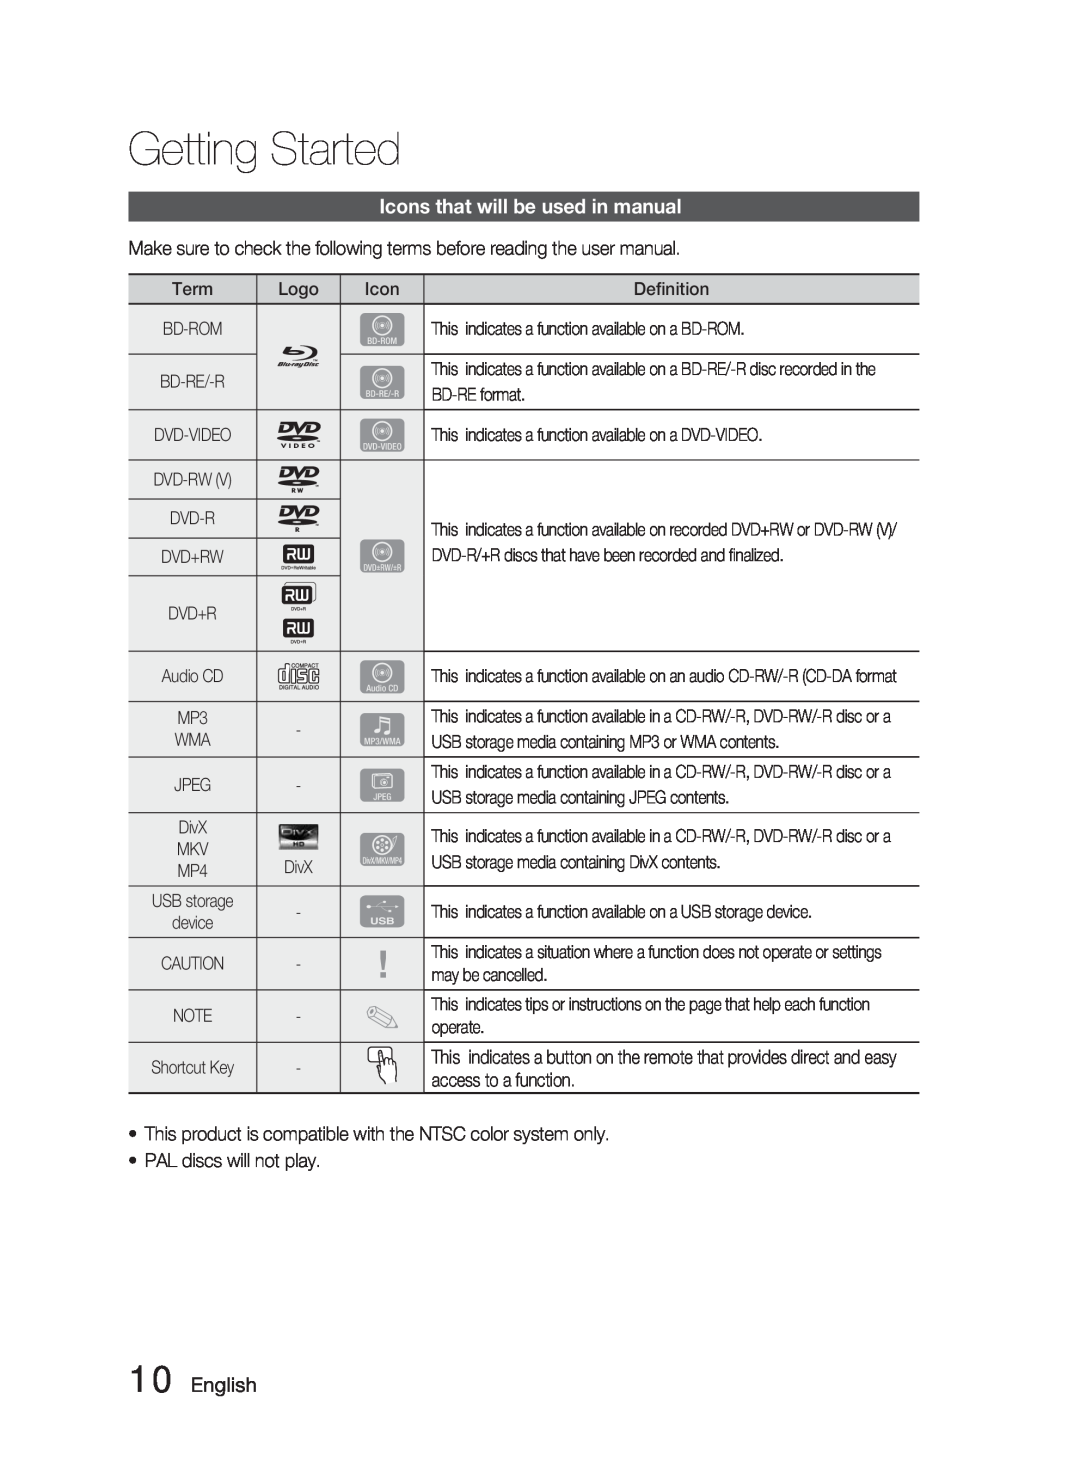 Samsung AH68-02279R user manual Icons that will be used in manual, English, Getting Started 